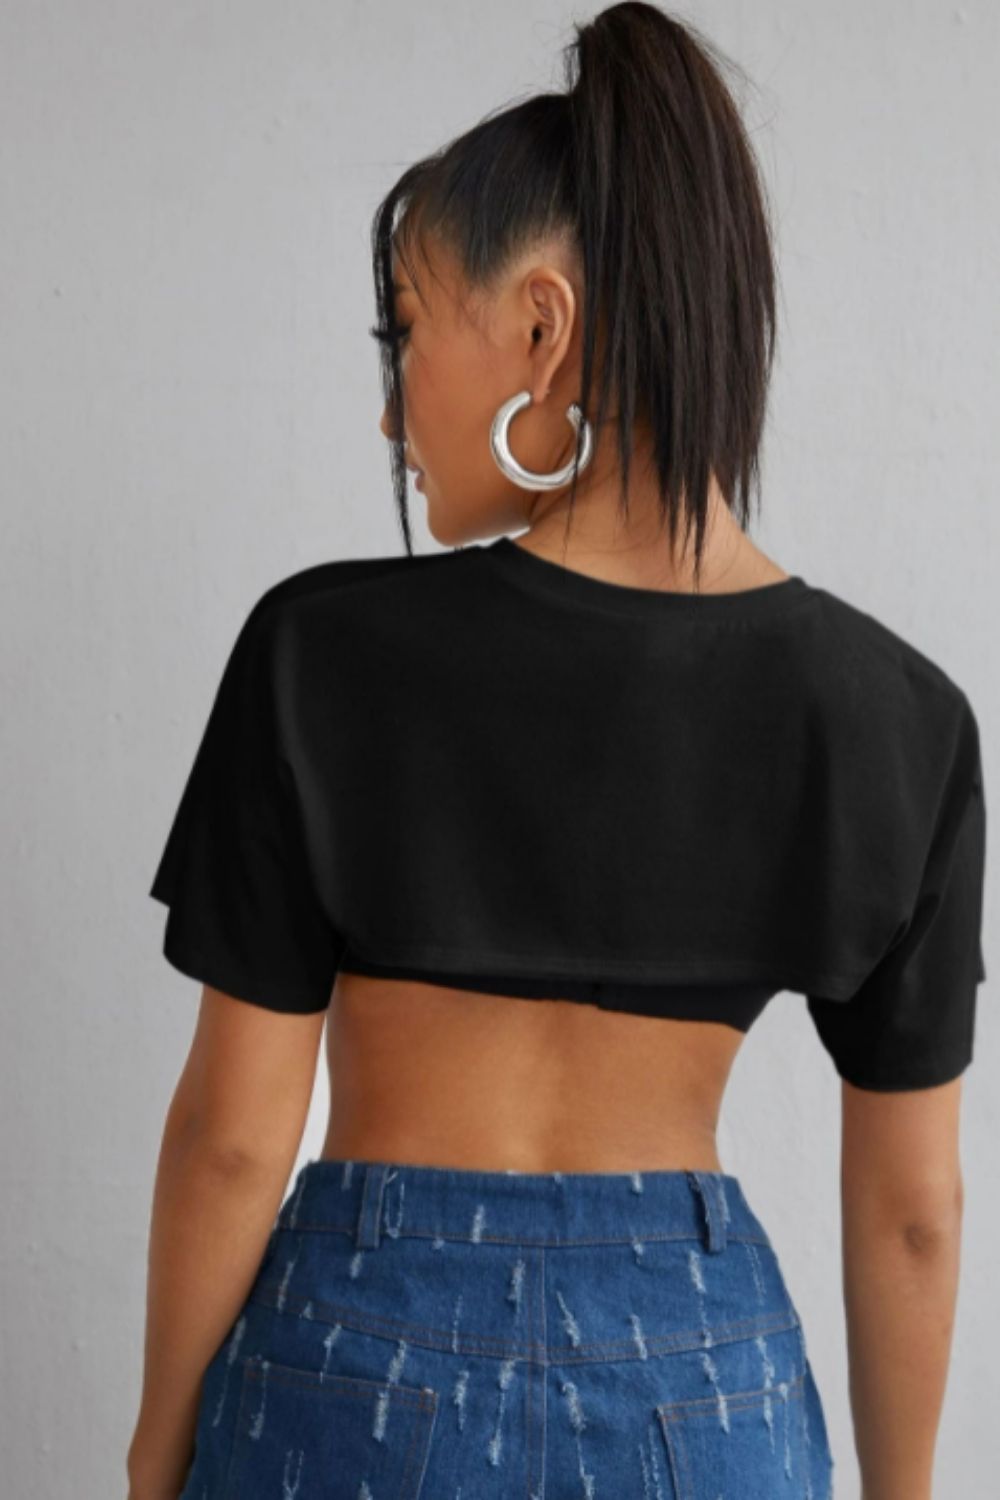 Boxy super crop top without bra – Styched Fashion